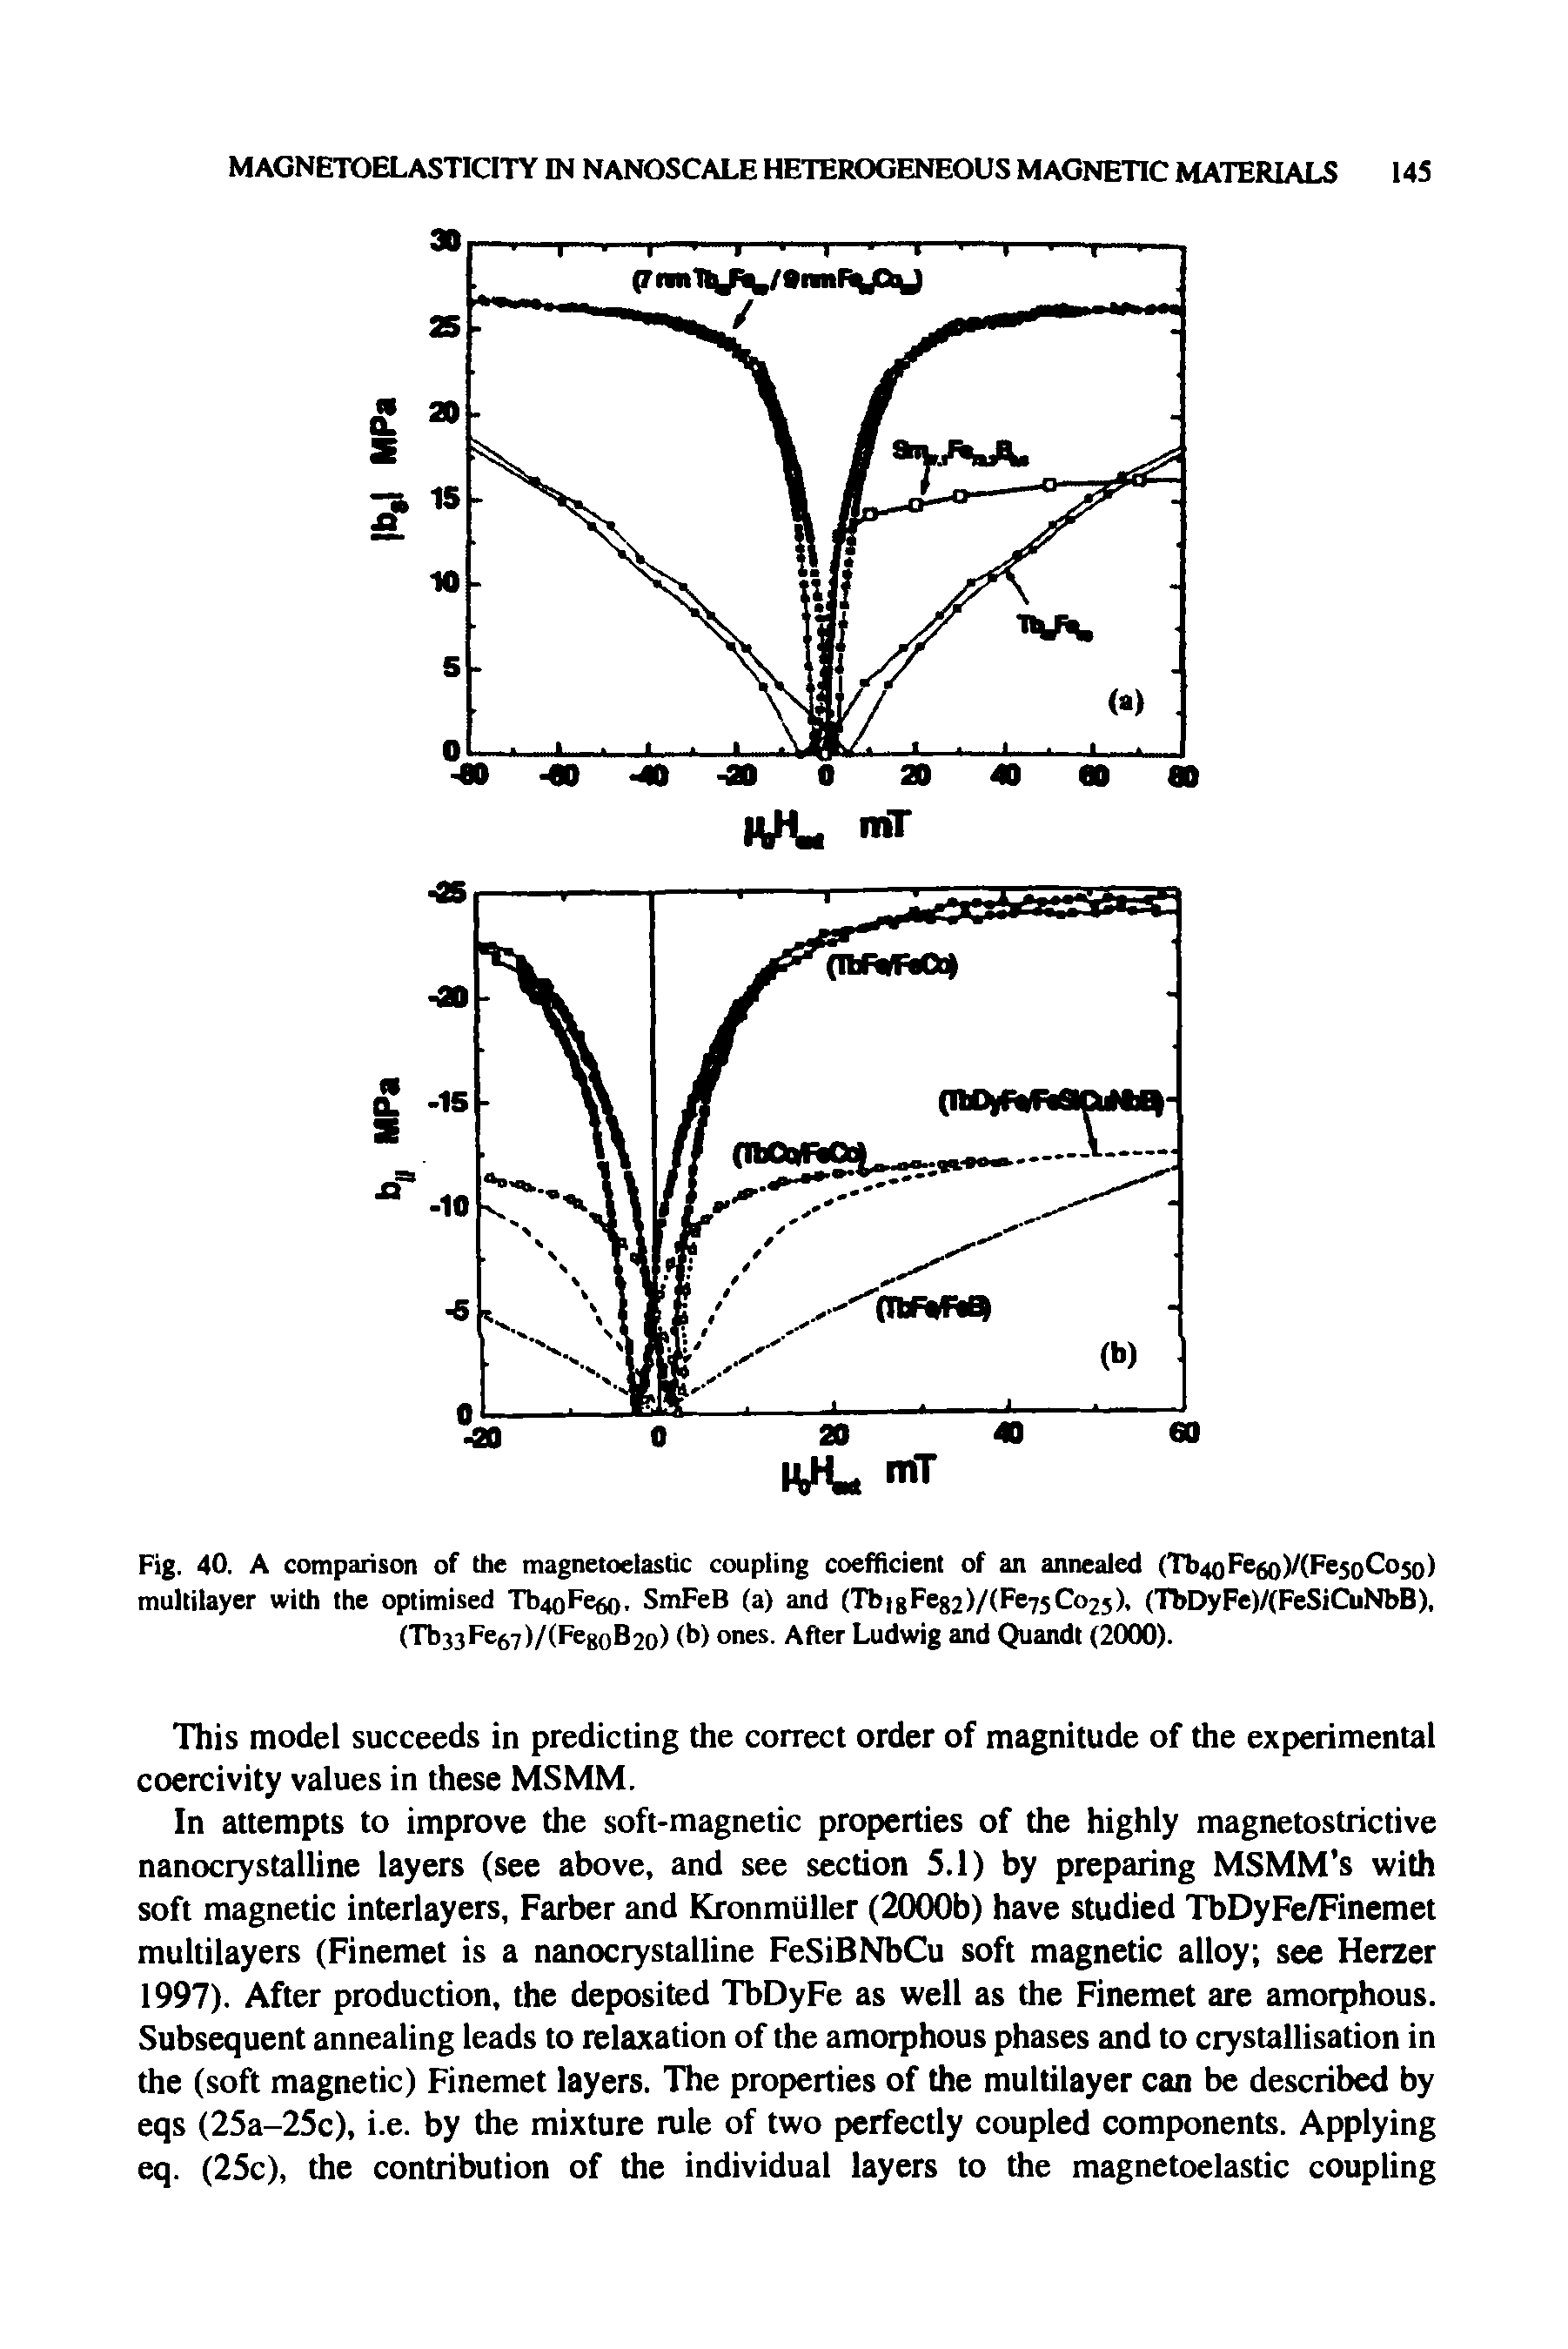 Fig. 40. A comparison of the magnetoelastic coupling coefficient of an annealed (Tb4oFego)/(FesoCoso) multilayer with the optimised Tb Fego. SmFeB (a) and (Tb gFe82)/(Fe75Co25), (TbDyFe)/(FeSiCuNbB), (Tb33Fe67)/(Fe8oB2o) (b) ones. After Ludwig and Quandt (2000).